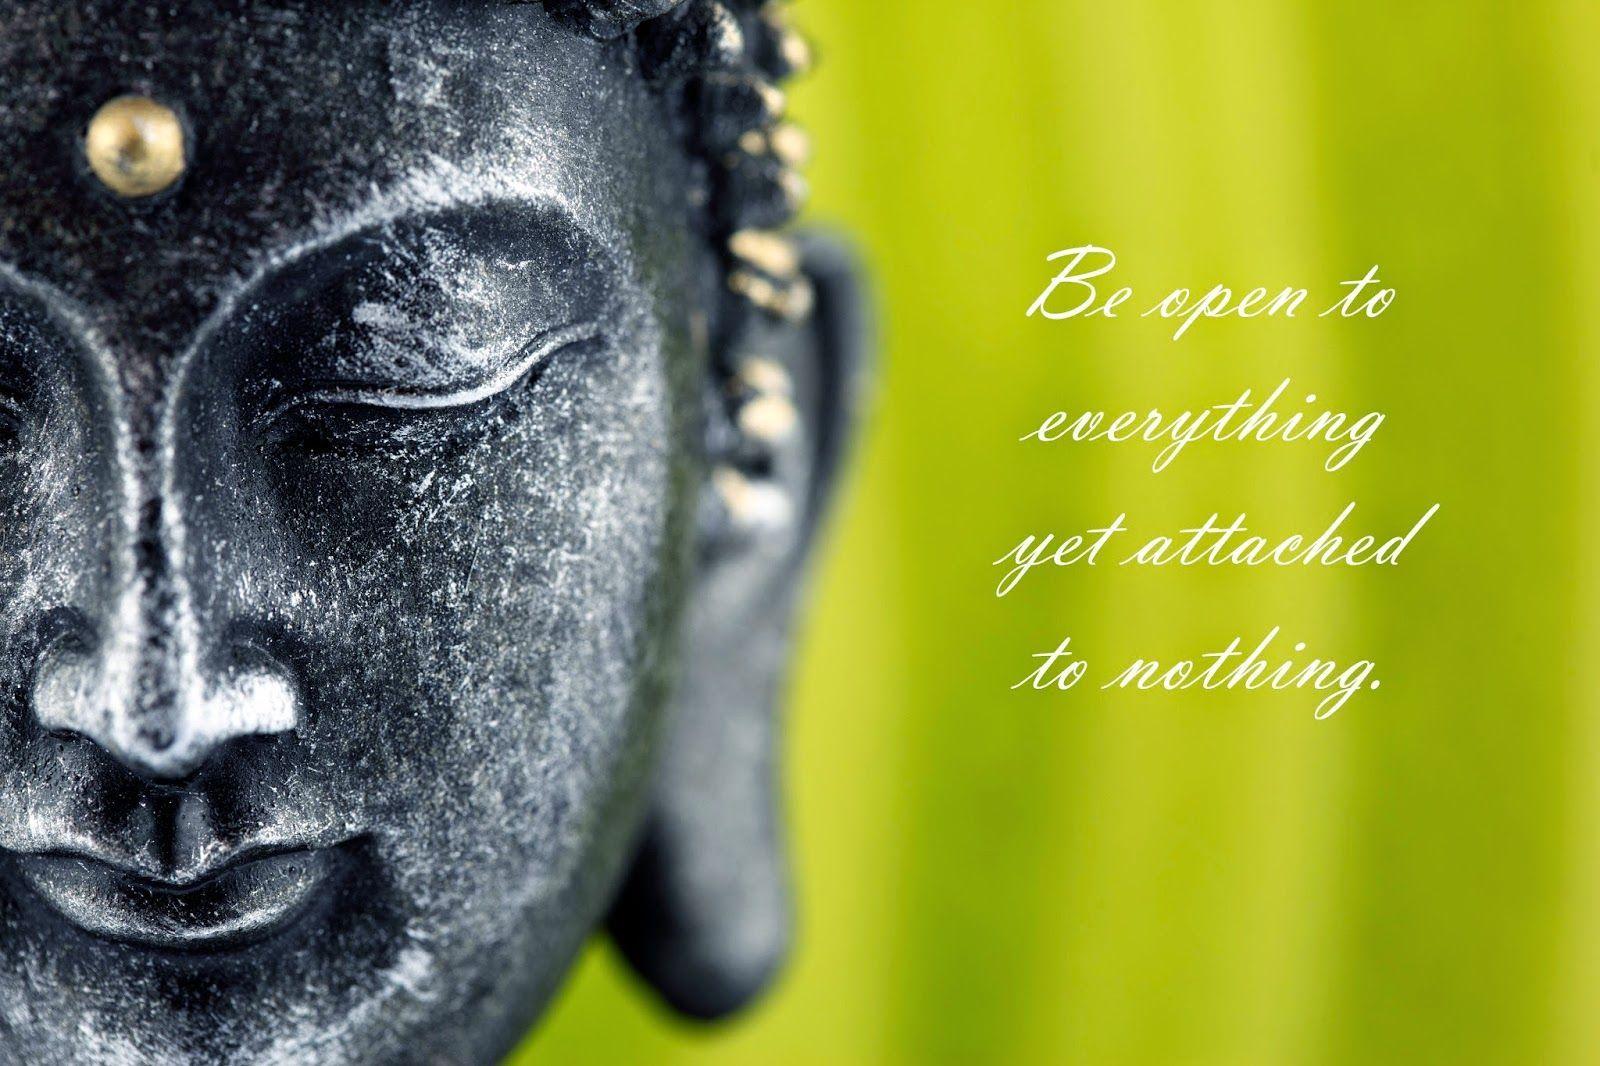 beautiful buddha quotes. buddha quotes on peace wallpaper image